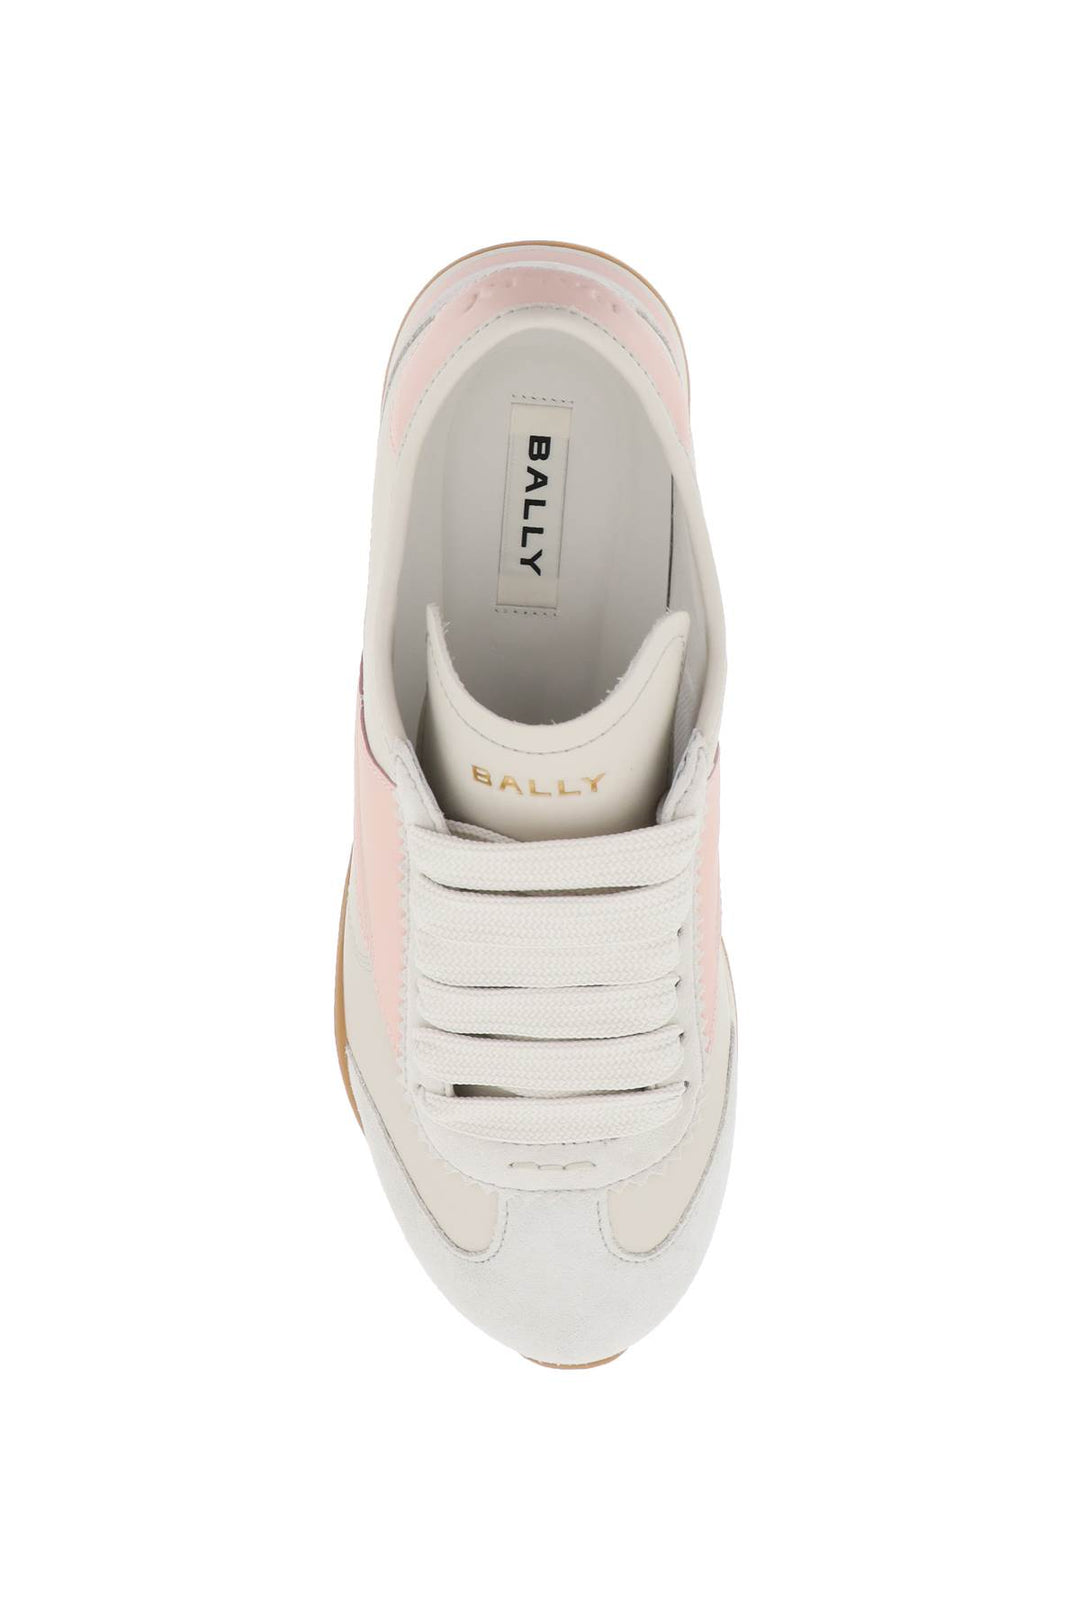 Bally Leather Sonney Sneakers   Grey